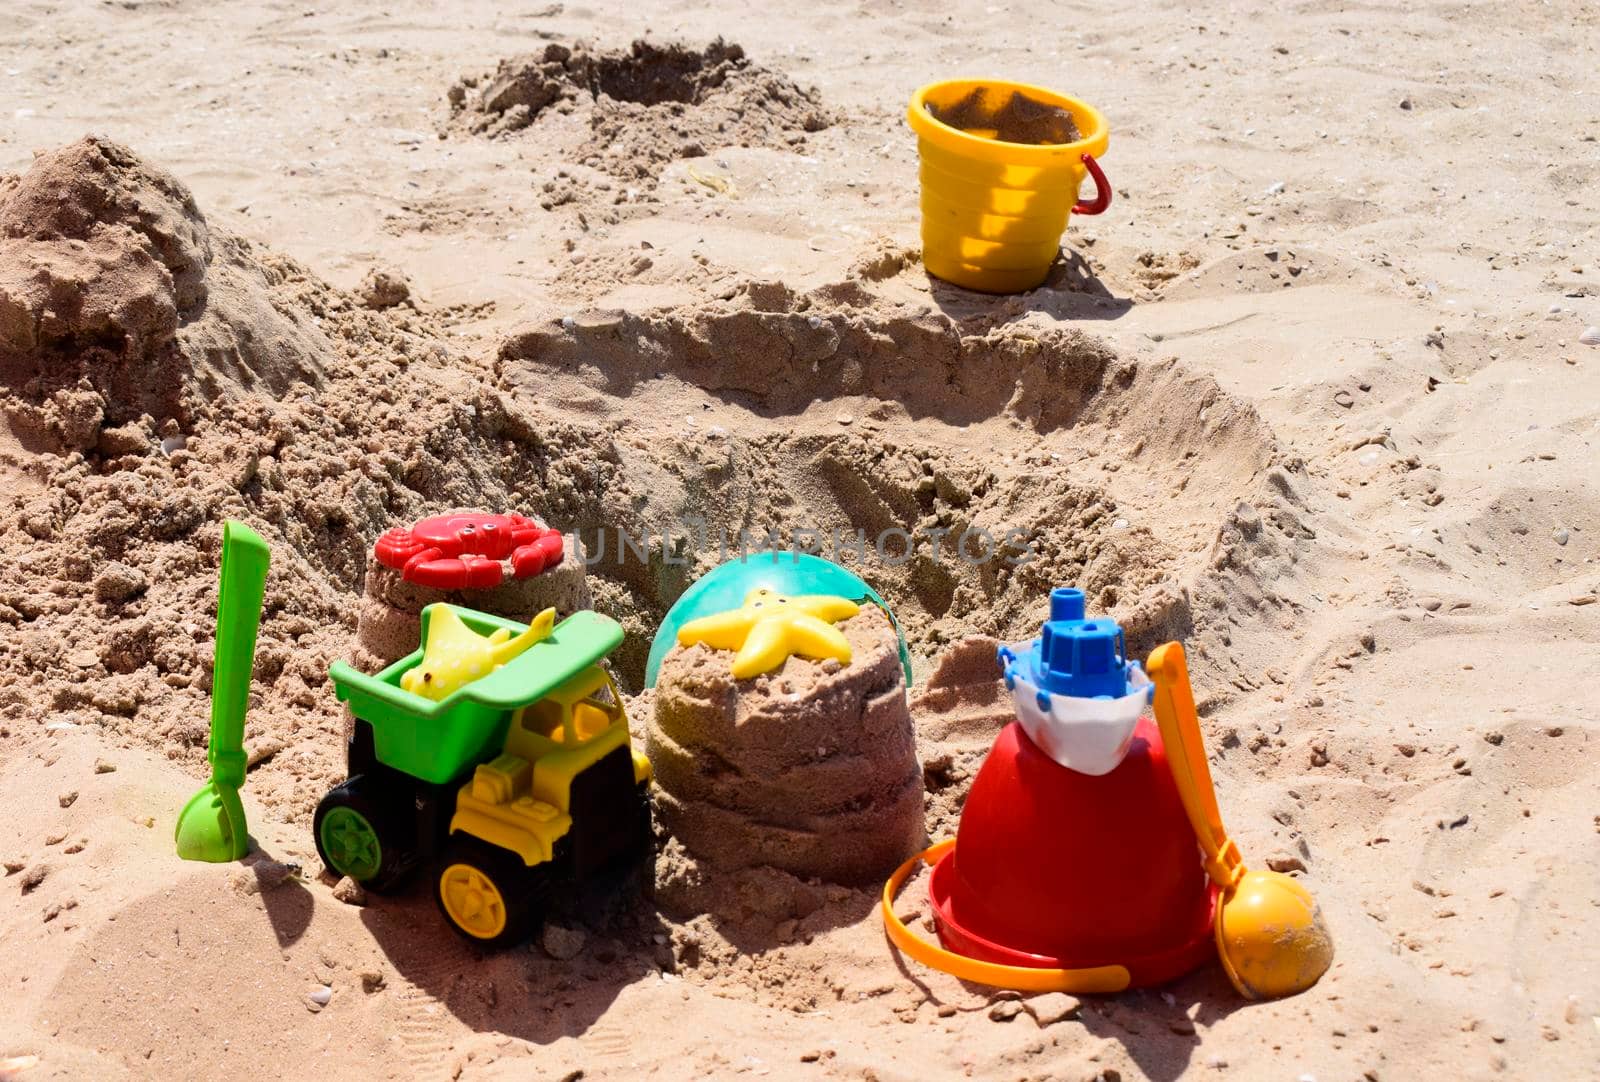 Children's plastic toys green end yellow car, shovel, yellow and red buckets, green ball with yellow sand on the beach by sea. Children's beach toys on sand on a sunny day. Sandbox on the playground